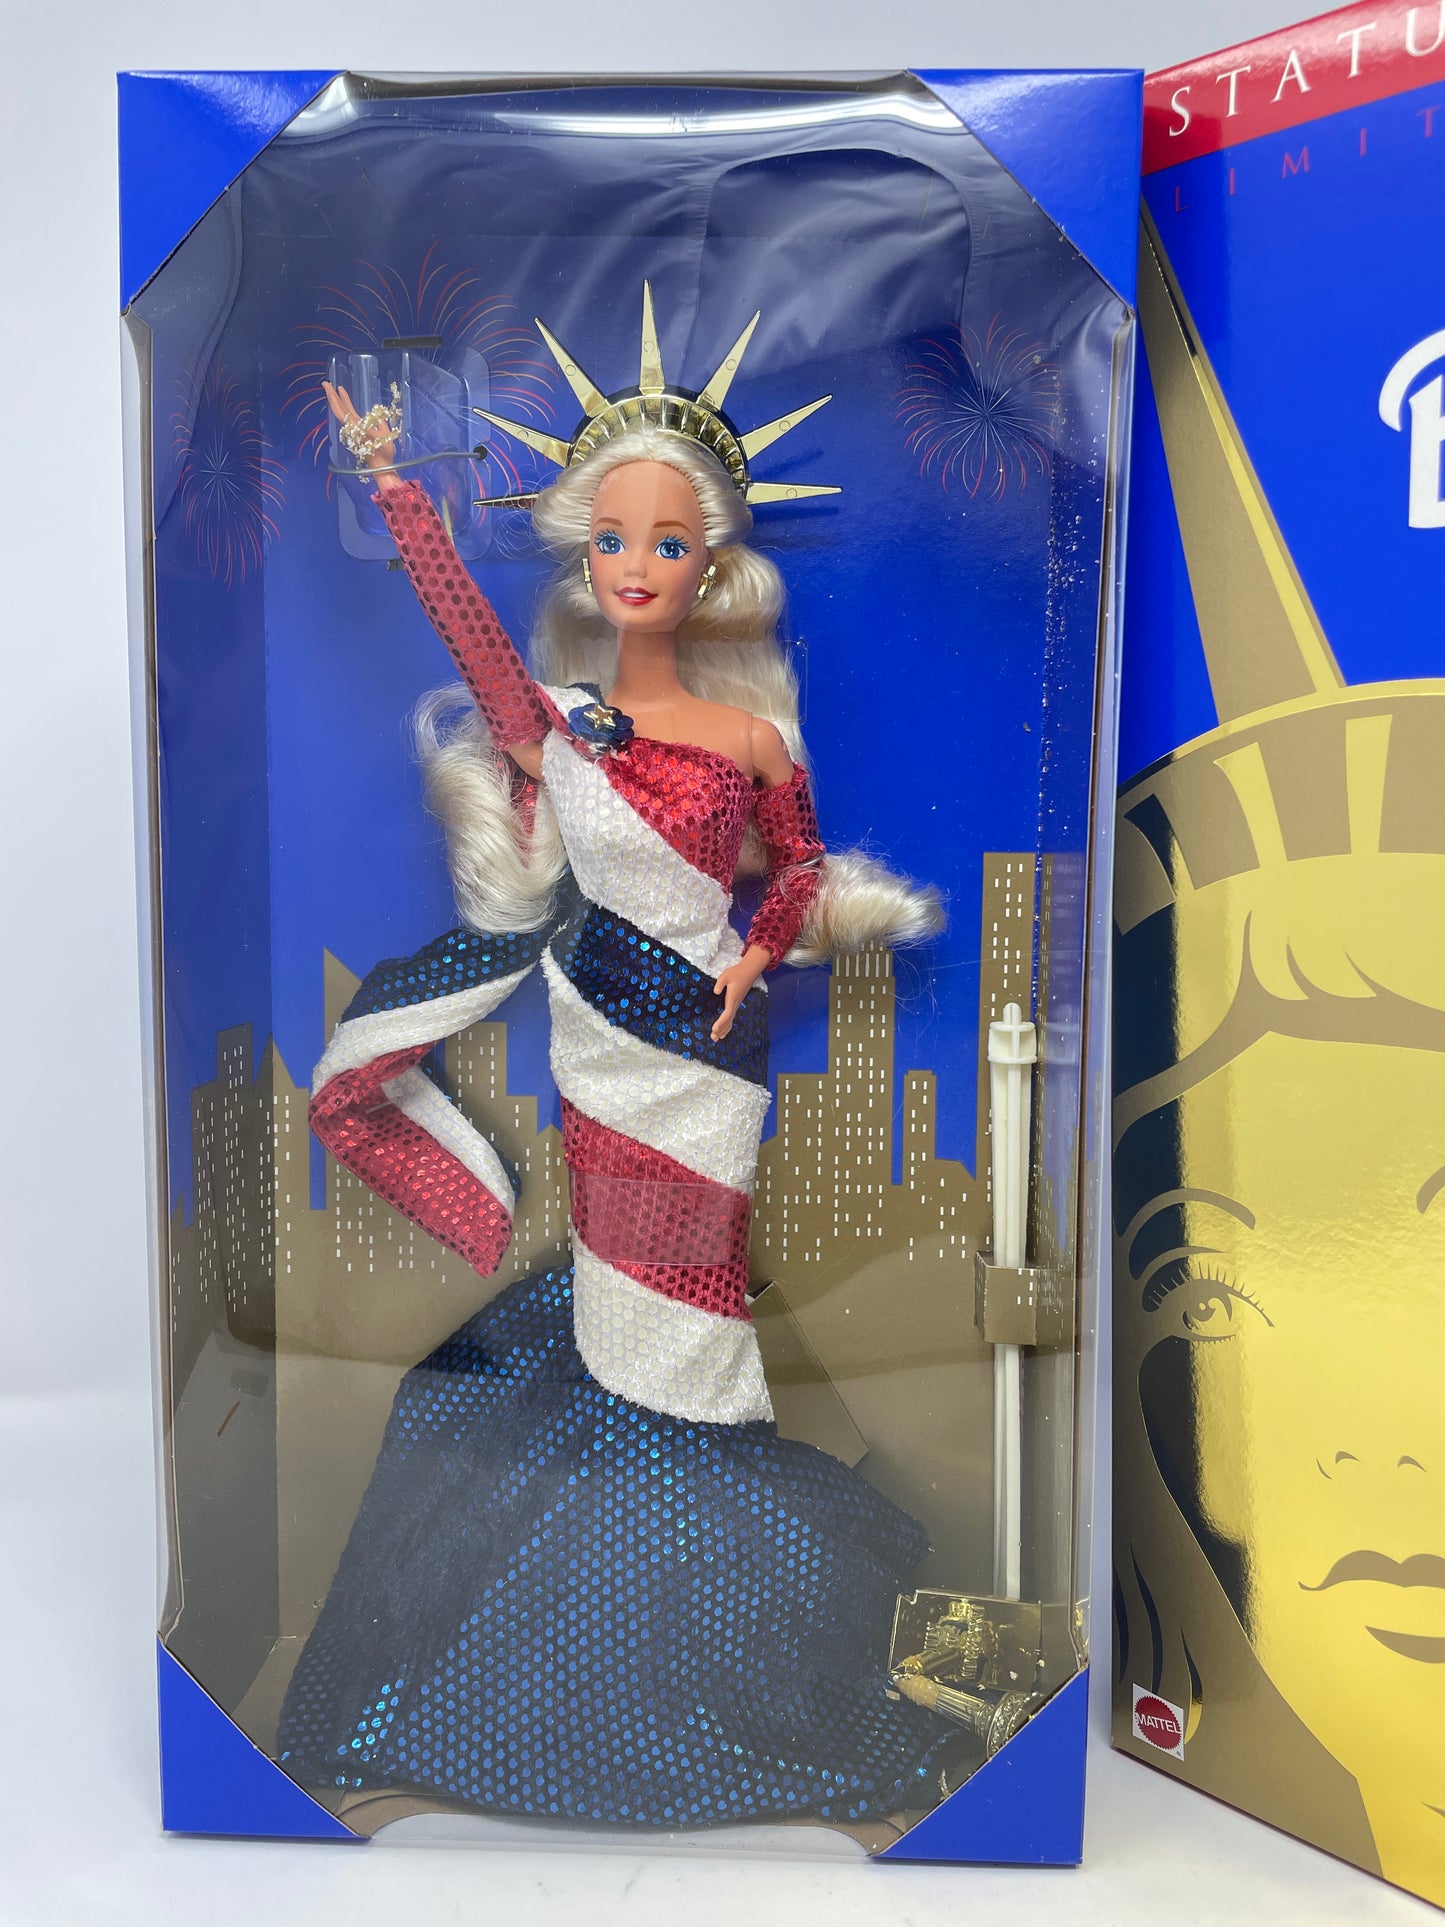 STATUE OF LIBERTY BARBIE - LIMITED EDITION - FAO SCHWARZ AMERICAN BEAUTIES COLLECTION - #14664 - MATTEL 11995